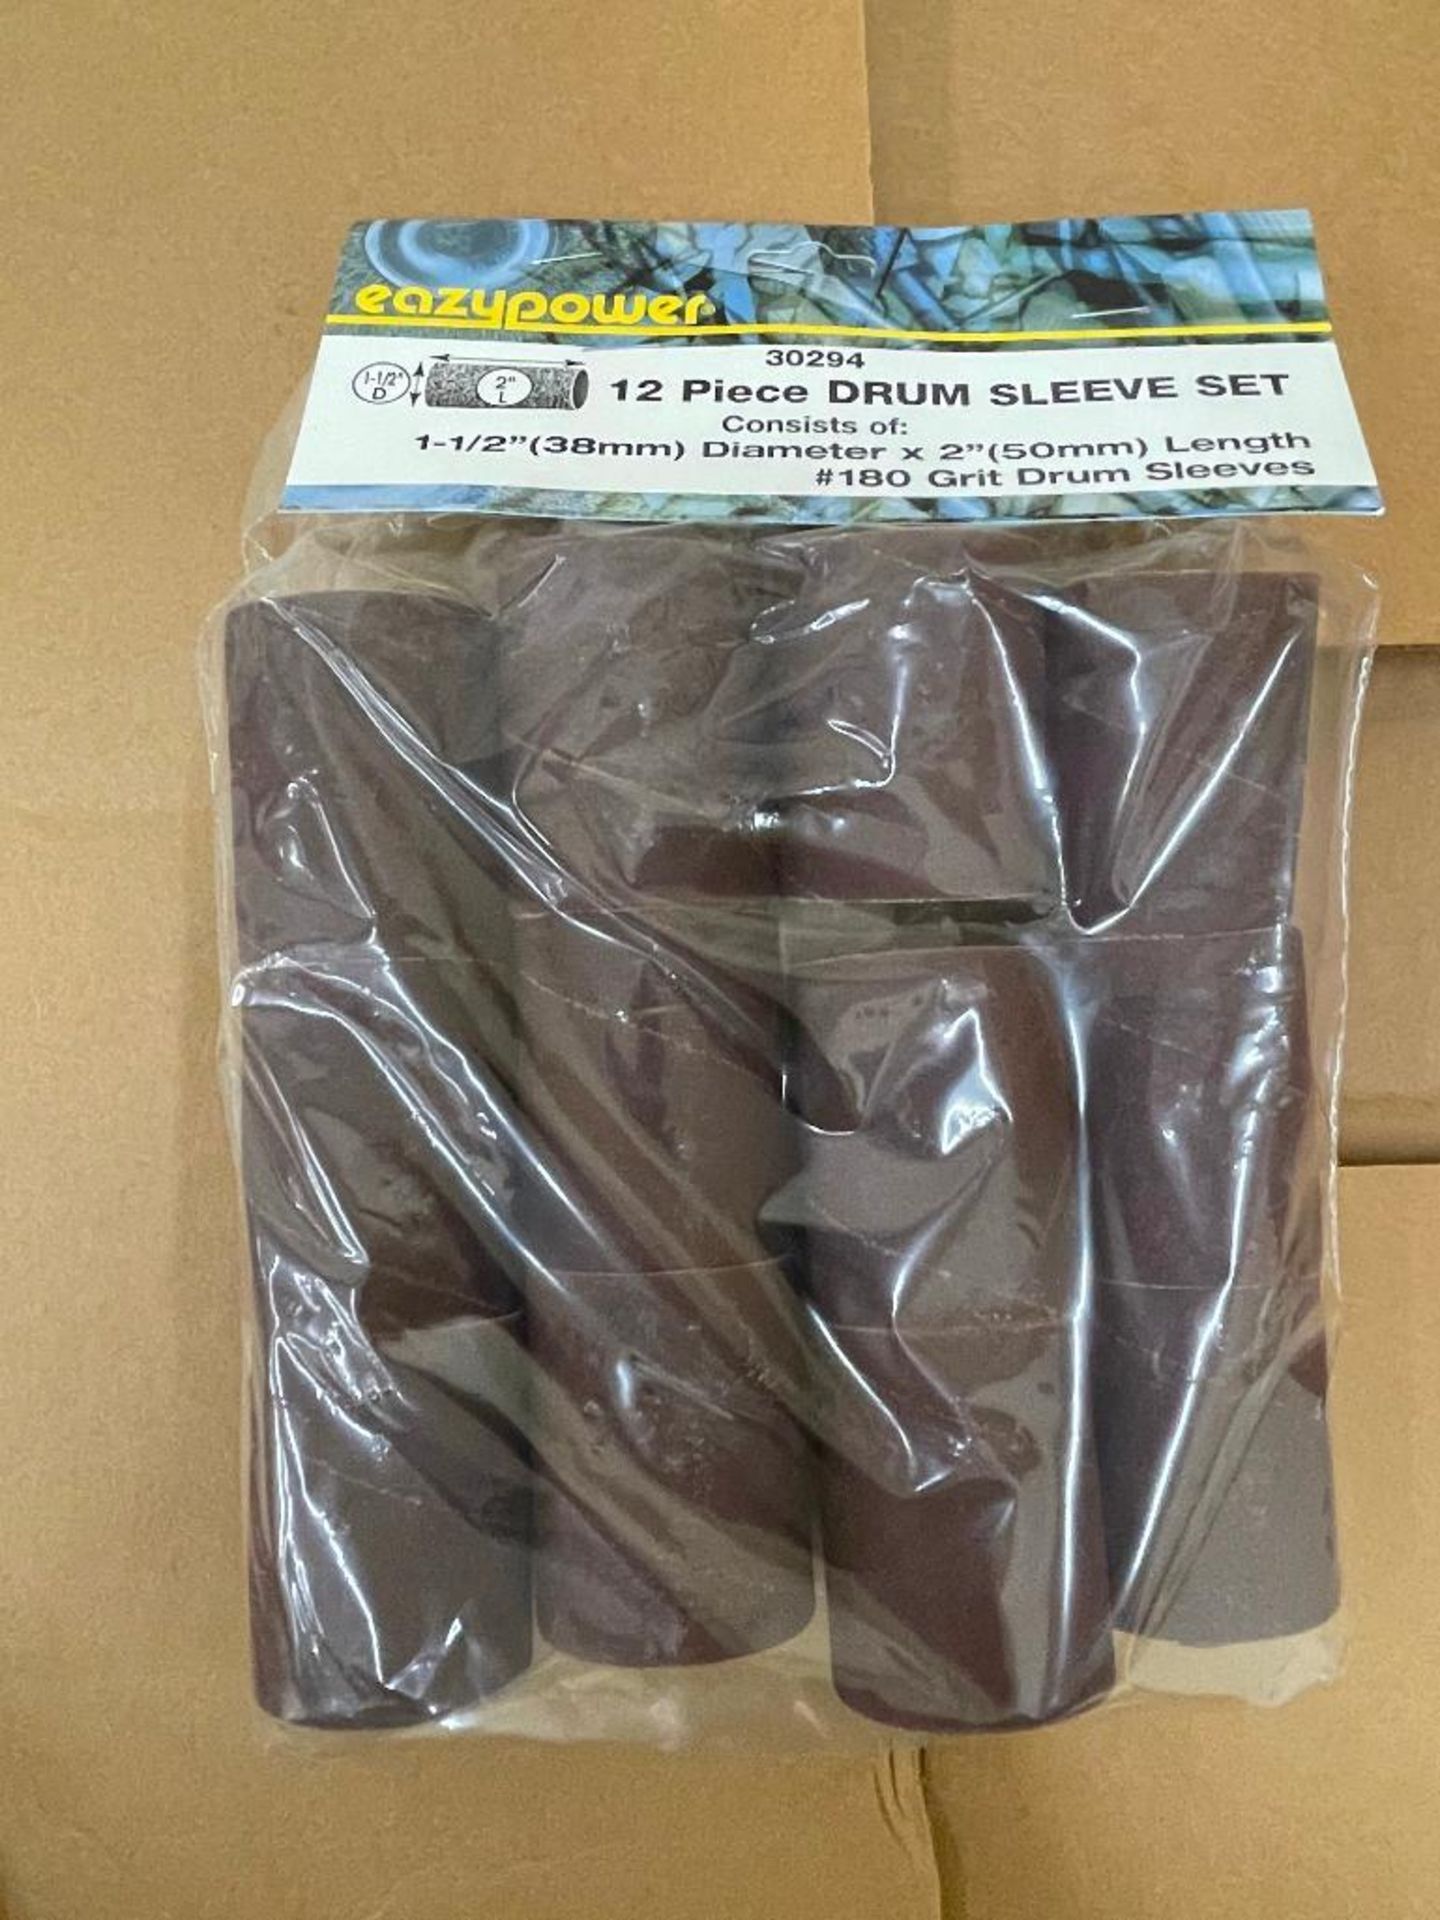 DESCRIPTION: (3) BOXES OF 1 1/2" X 2" SANDING SLEEVES #180 BRAND / MODEL: EAZY POWER 30294 QTY: 1